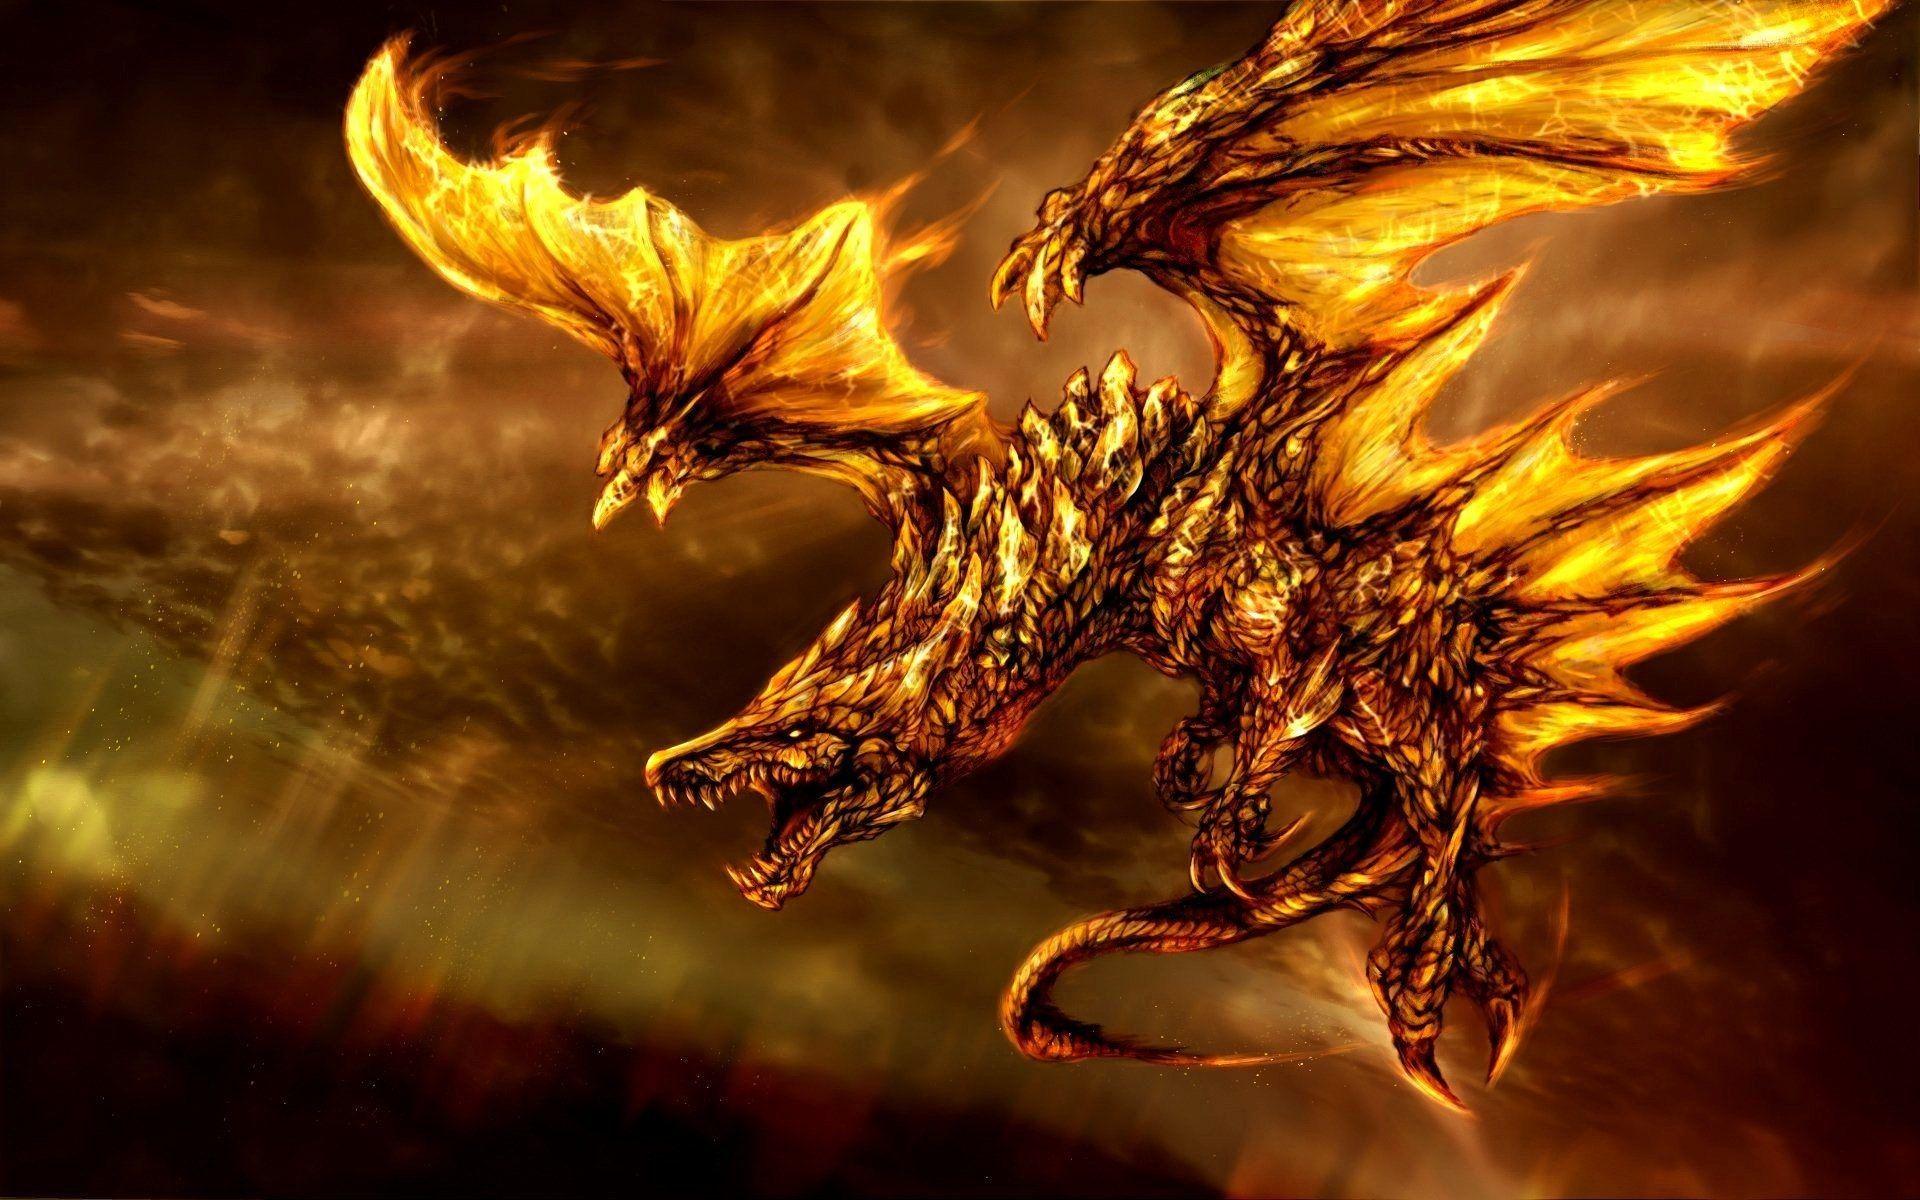 Cool Fire Dragon Wallpaper images